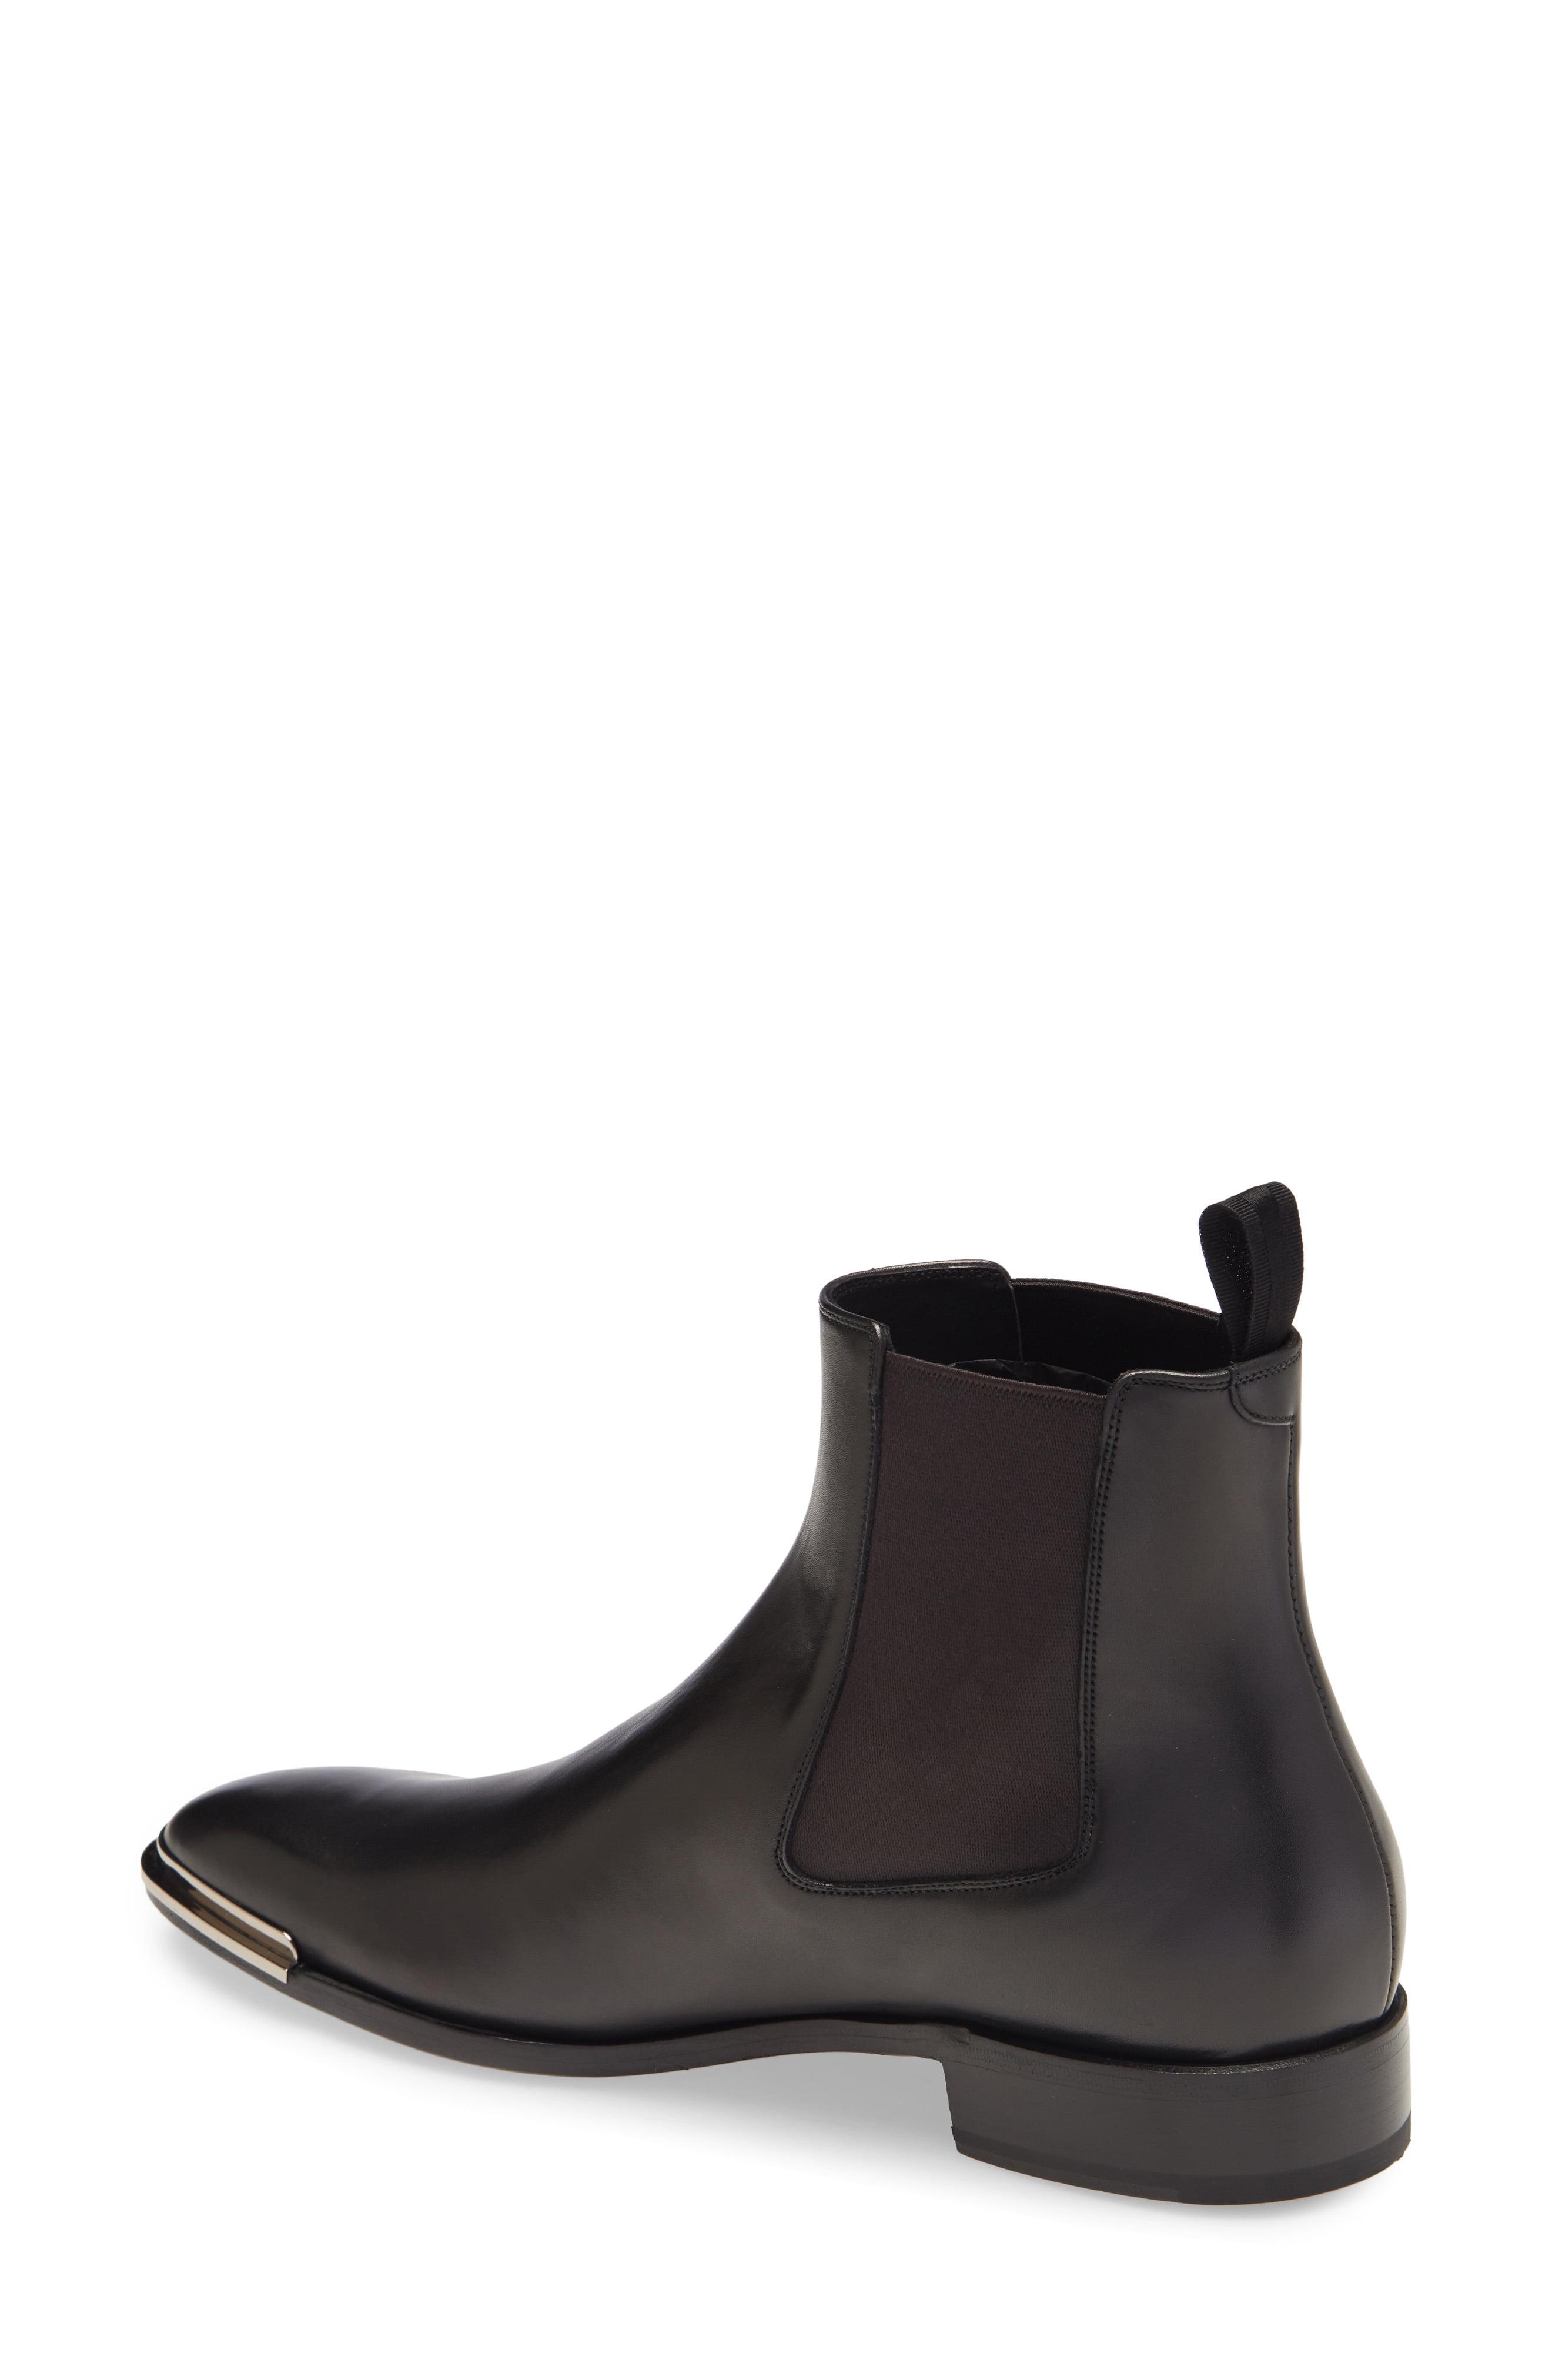 Givenchy Leather Dallas Chelsea Boot in Black for Men - Lyst